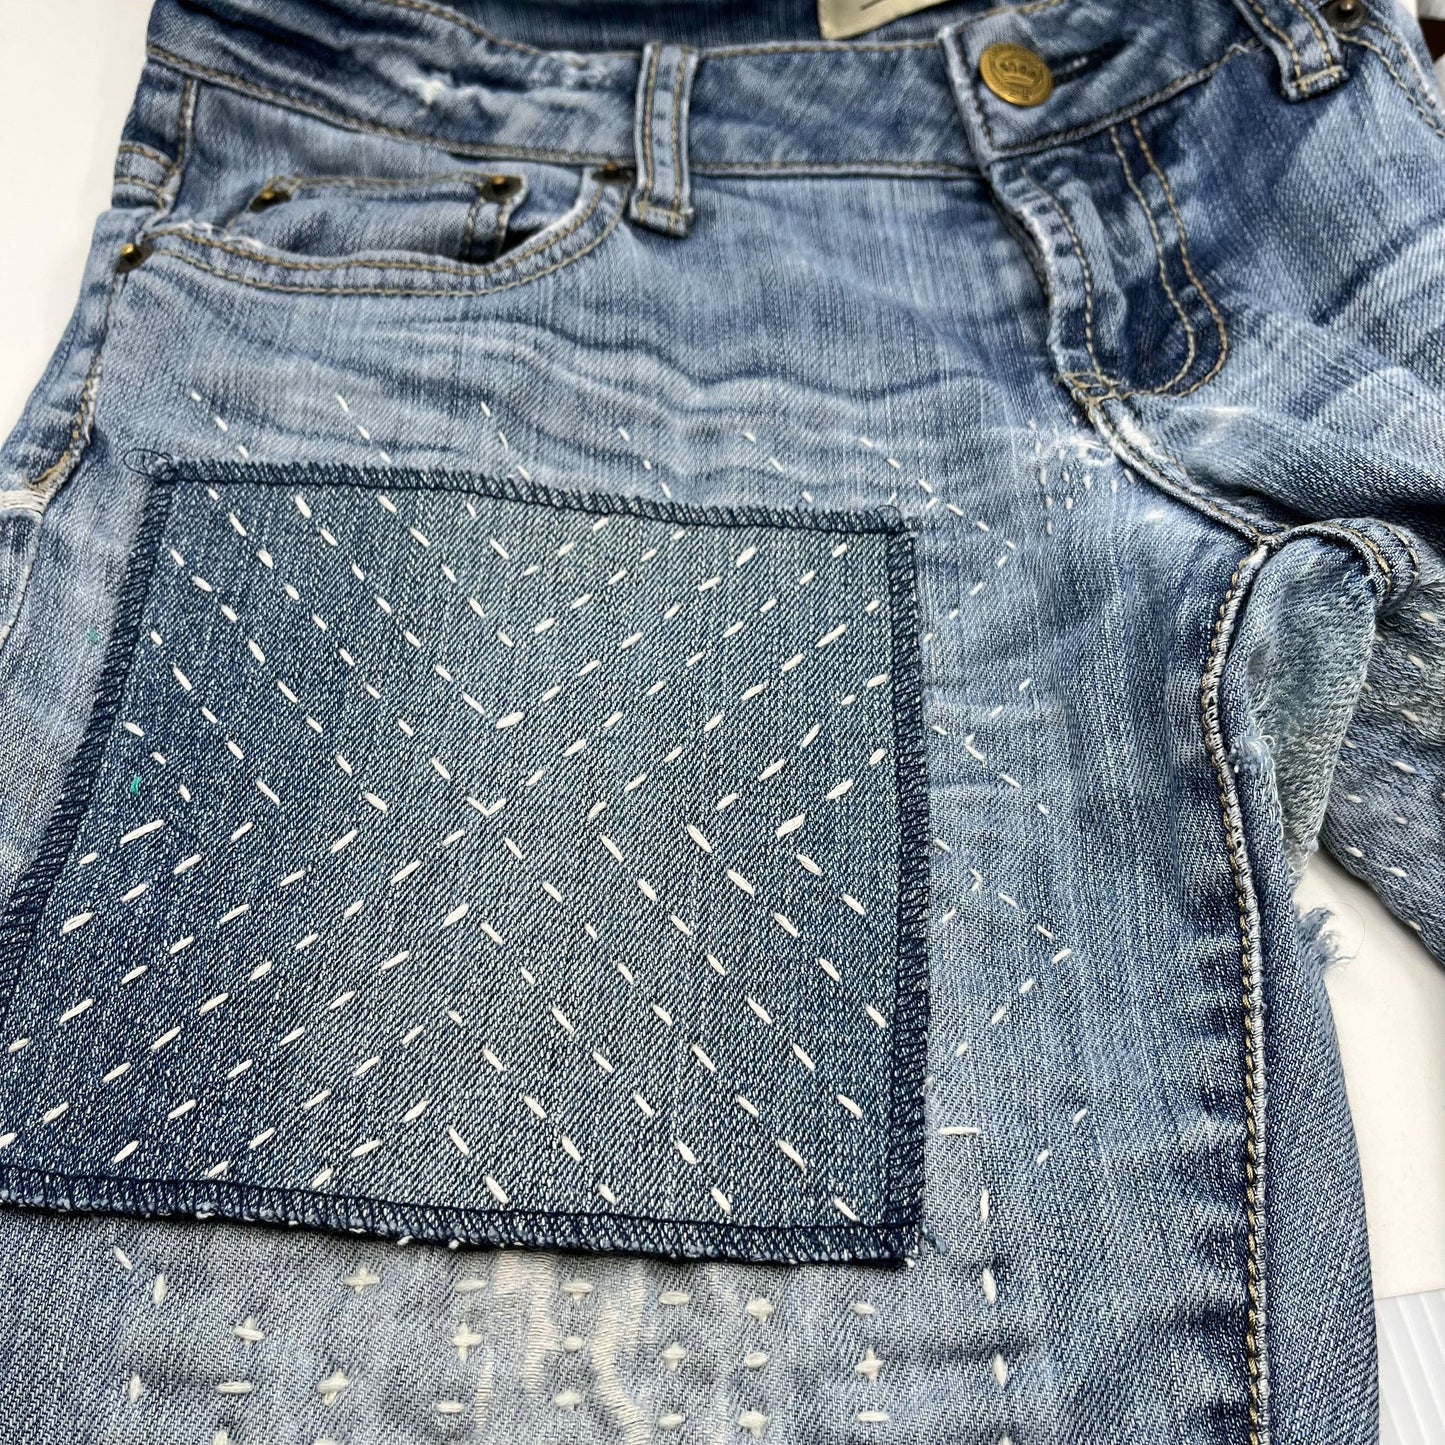 close up angled view of a square patch made out of denim, handstitched with ivory running stitches in a radiating X pattern, with overlocked edges, on a pair of jeans with other visible mends